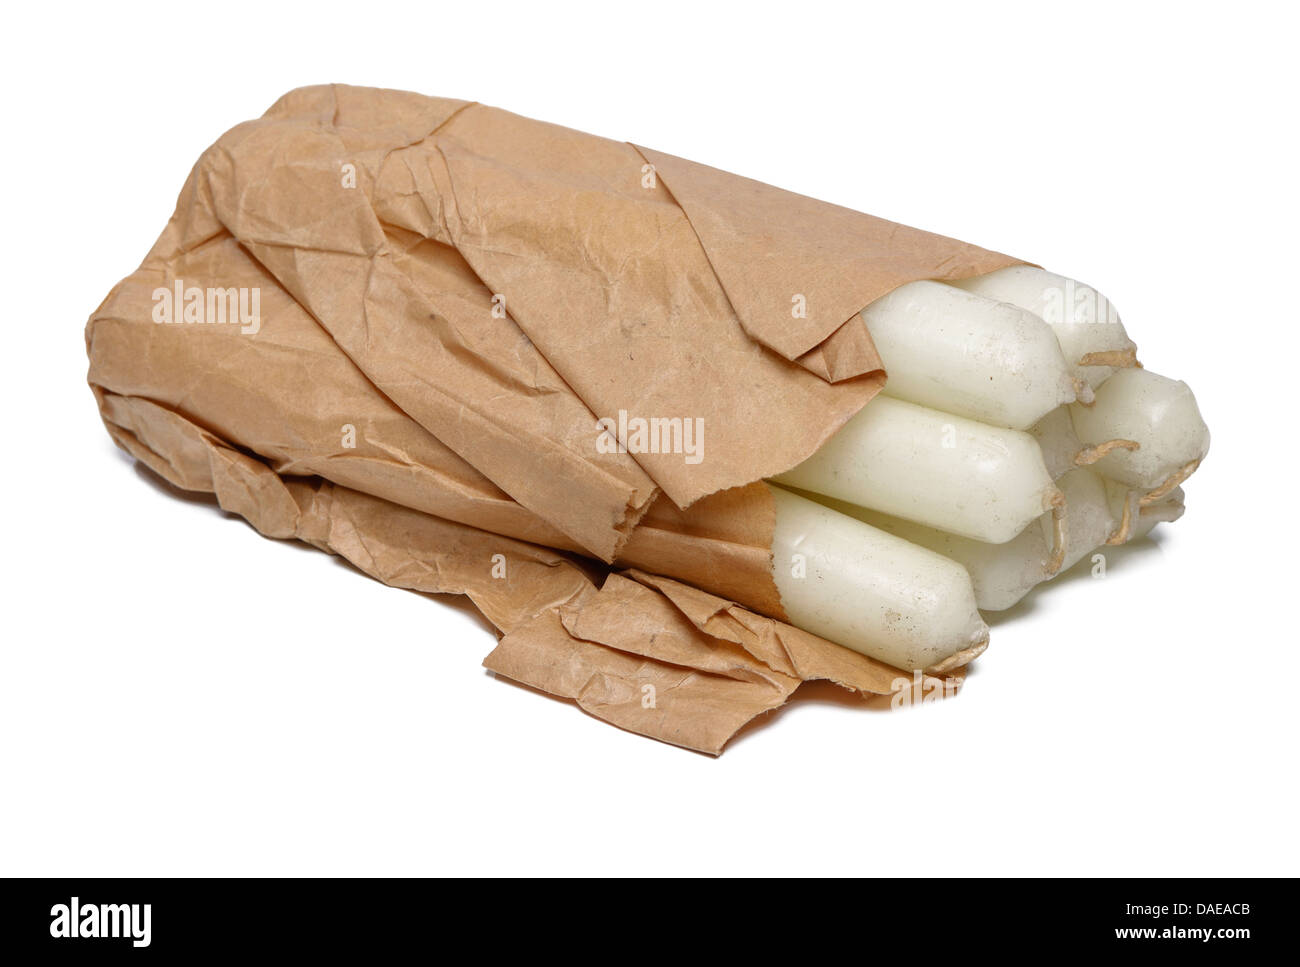 Bundle of candles wrapped in a brown paper bag Stock Photo